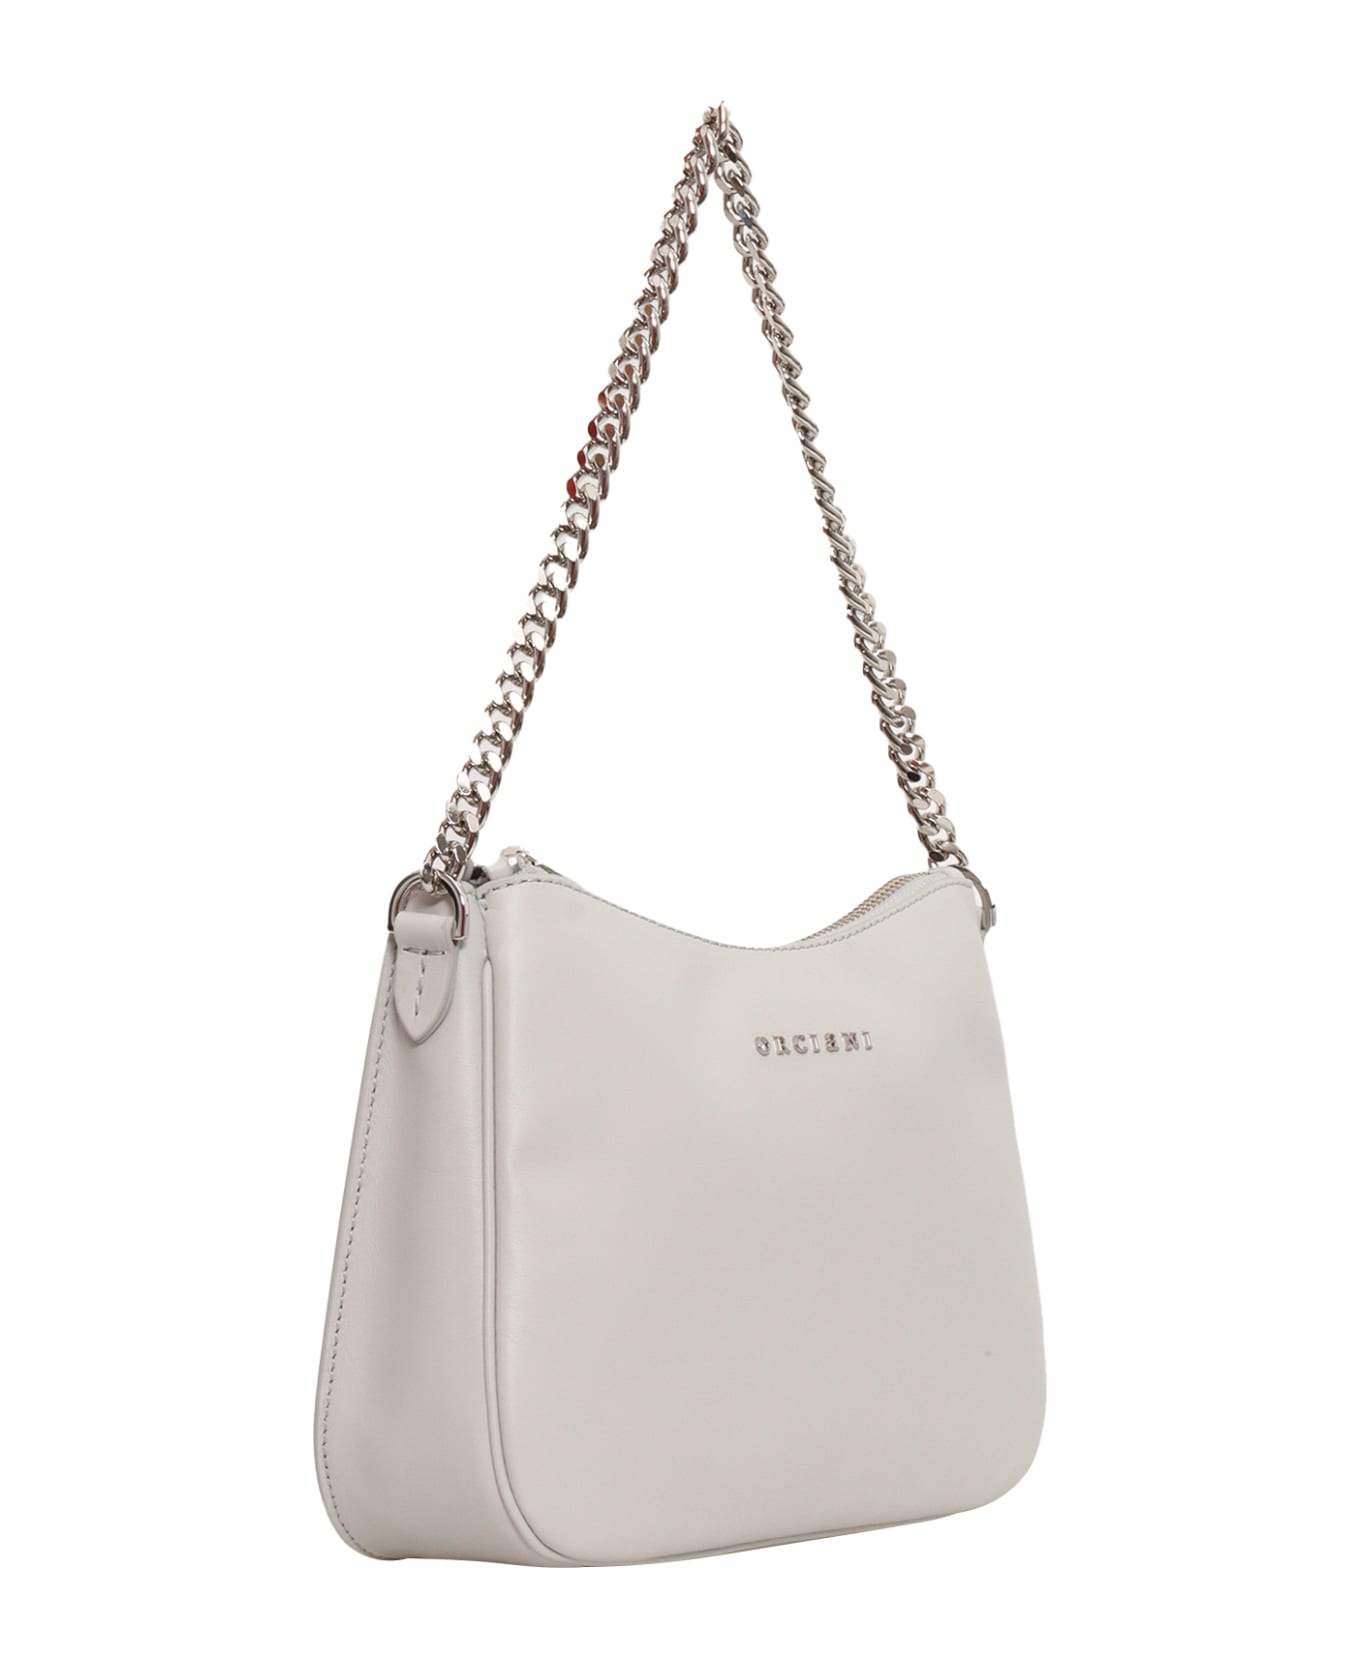 Orciani White Clutch Bag - WHITE